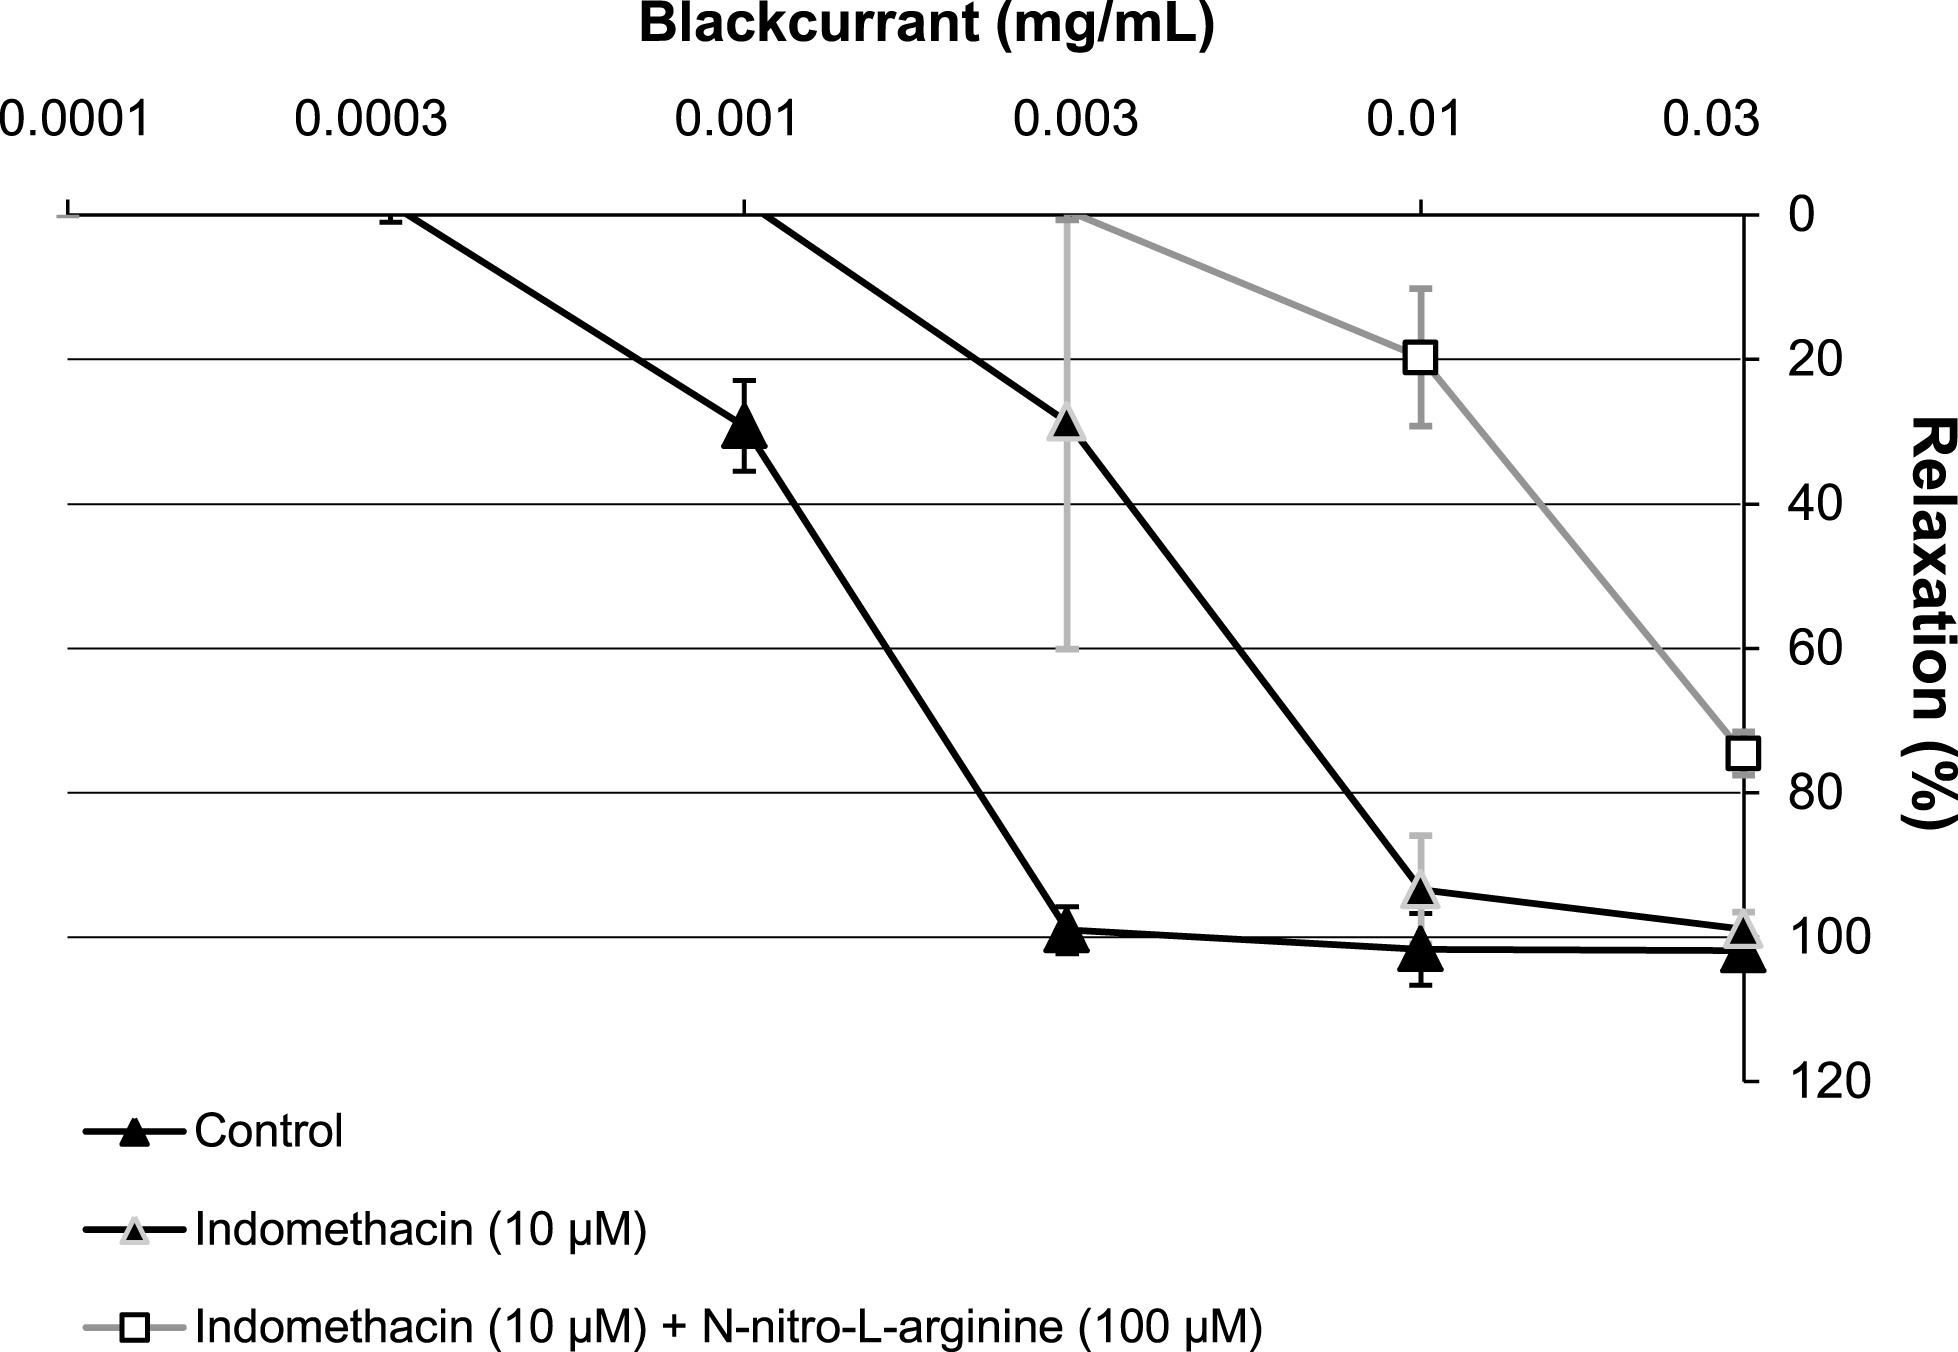 Characterisation of the relaxation induced by increasing concentrations of blackcurrant leaf extract (0.0001 to 0.03 mg/mL) in porcine coronary artery rings, precontracted with U46619. Rings with an intact endothelium were incubated with NG-nitro-L-arginine (100μM). All experiments were performed in the presence of Indomethacin (10μM), except the control. Data are shown as mean±SD of two independent experiments.